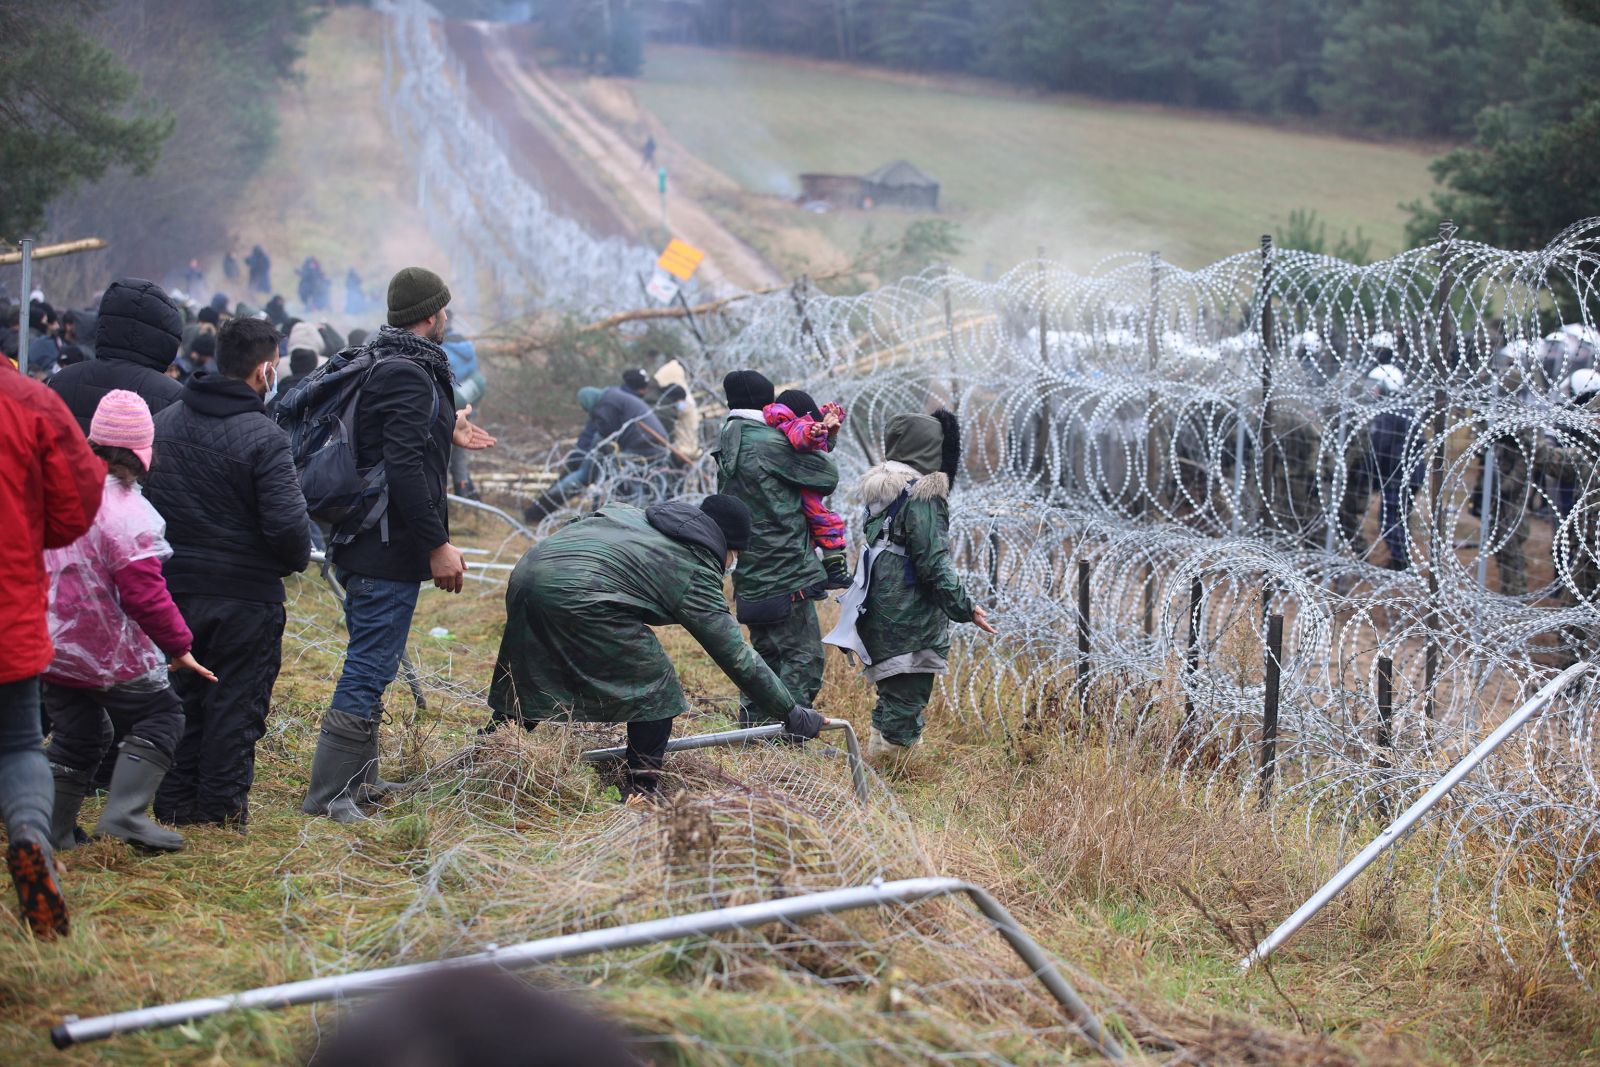 epa09572057 A handout photo made available by Belta news agency shows migrants clashing with authorities on the Belarusian-Polish border in the Grodno region, Belarus, 08 November 2021 (issued 09 November 2021). According to the State Border Committee of Belarus, there are more than two thousand people near the border, including women and children, who want to obtain asylum in the European Union, 'and they do not consider the territory of the Republic of Belarus as a place of stay.' Against this background, the Polish authorities announced preparations for a breakthrough across the border. The territory is guarded by several thousand employees of the Polish special services. The migration crisis at the border of Belarus has been going on since the spring of 2021. Belarus President Alexander Lukashenko said that after the introduction of new EU sanctions against Minsk, the Belarusian authorities will no longer interfere with the movement of illegal migrants to the European Union.  EPA/LEONID SCHEGLOV / HANDOUT  HANDOUT EDITORIAL USE ONLY/NO SALES